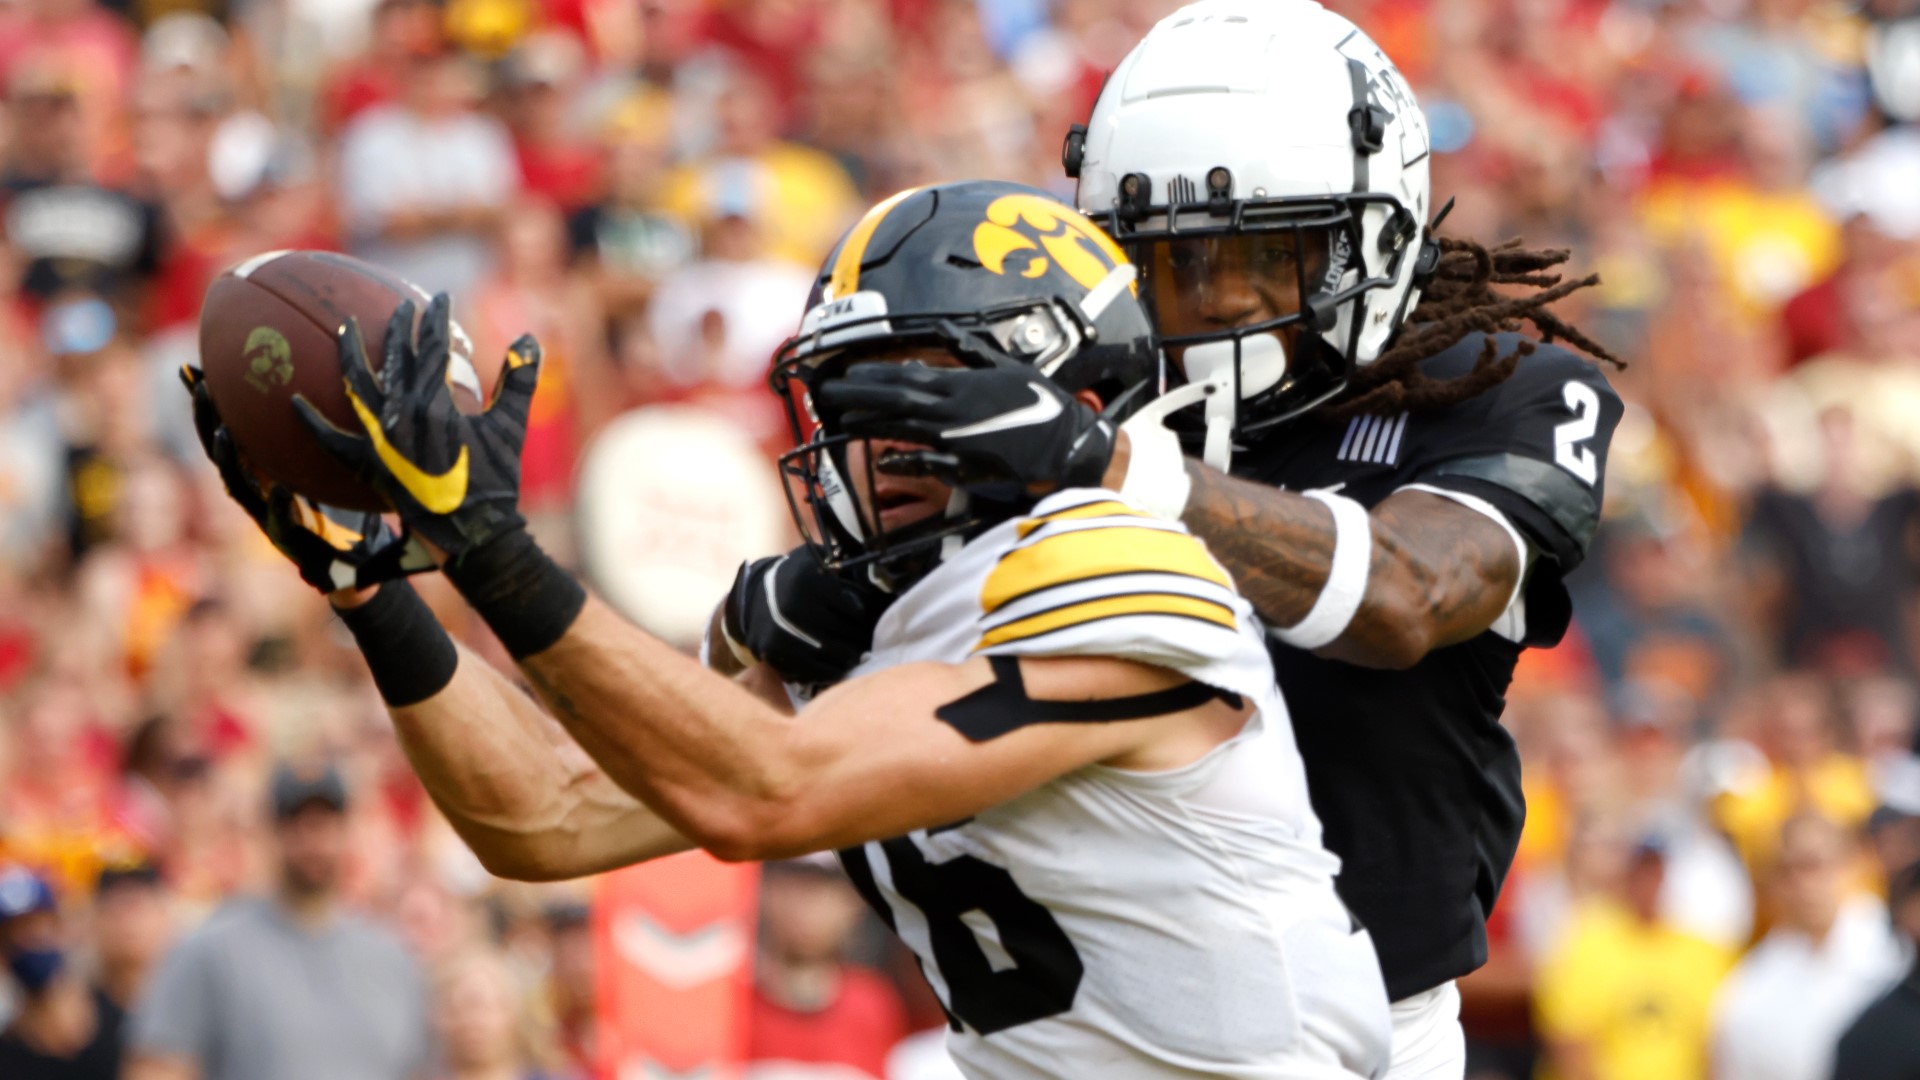 Iowa's Cy-Hawk victory pulled the team to their highest ranking since 2015.